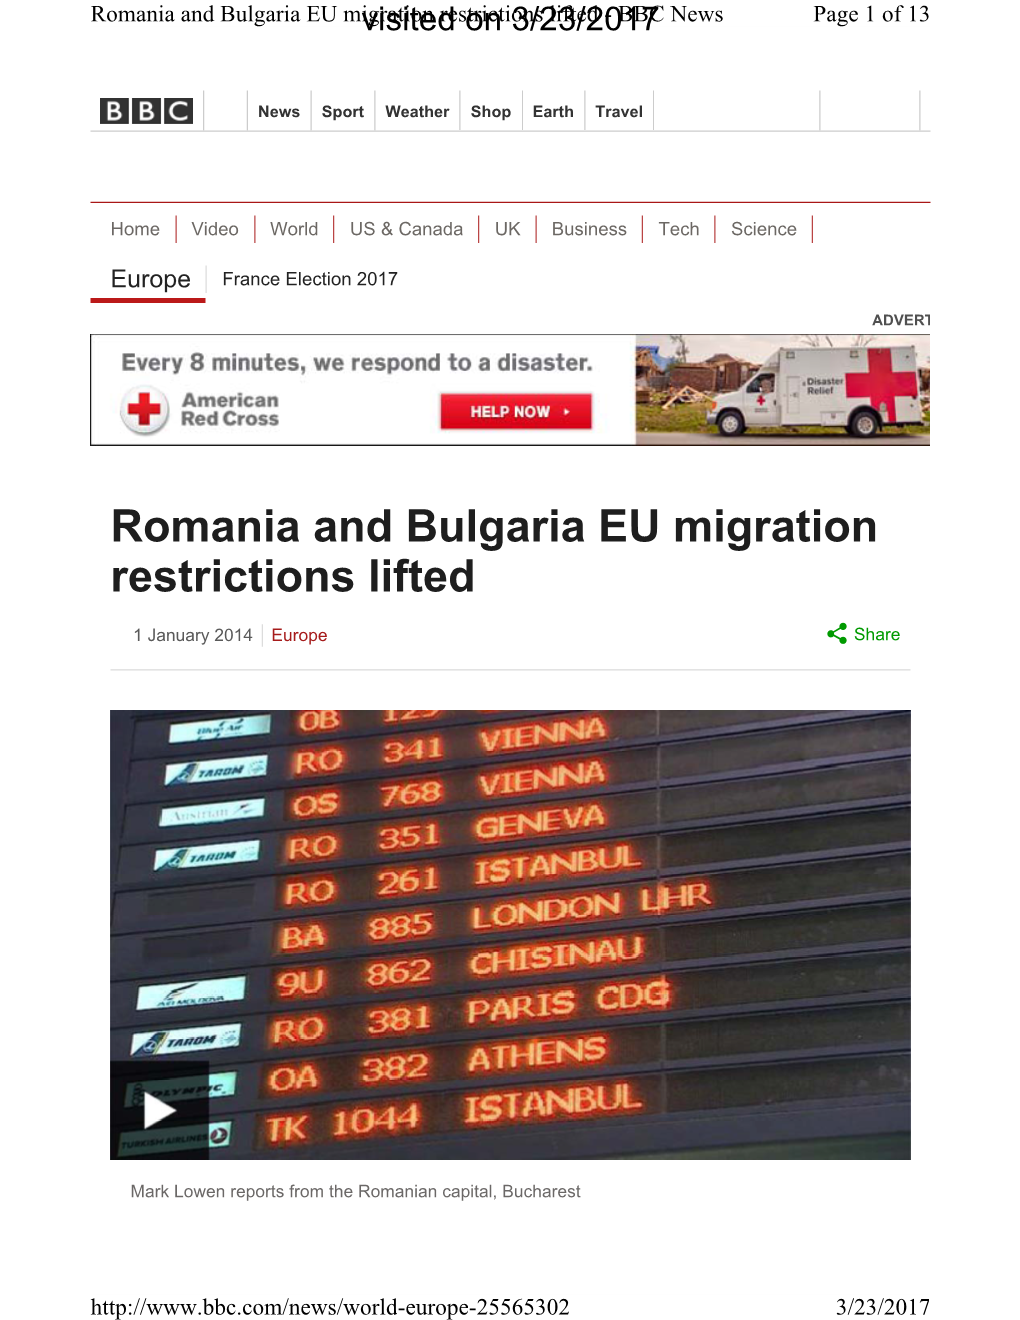 Romania and Bulgaria EU Migration Restrictions Lifted